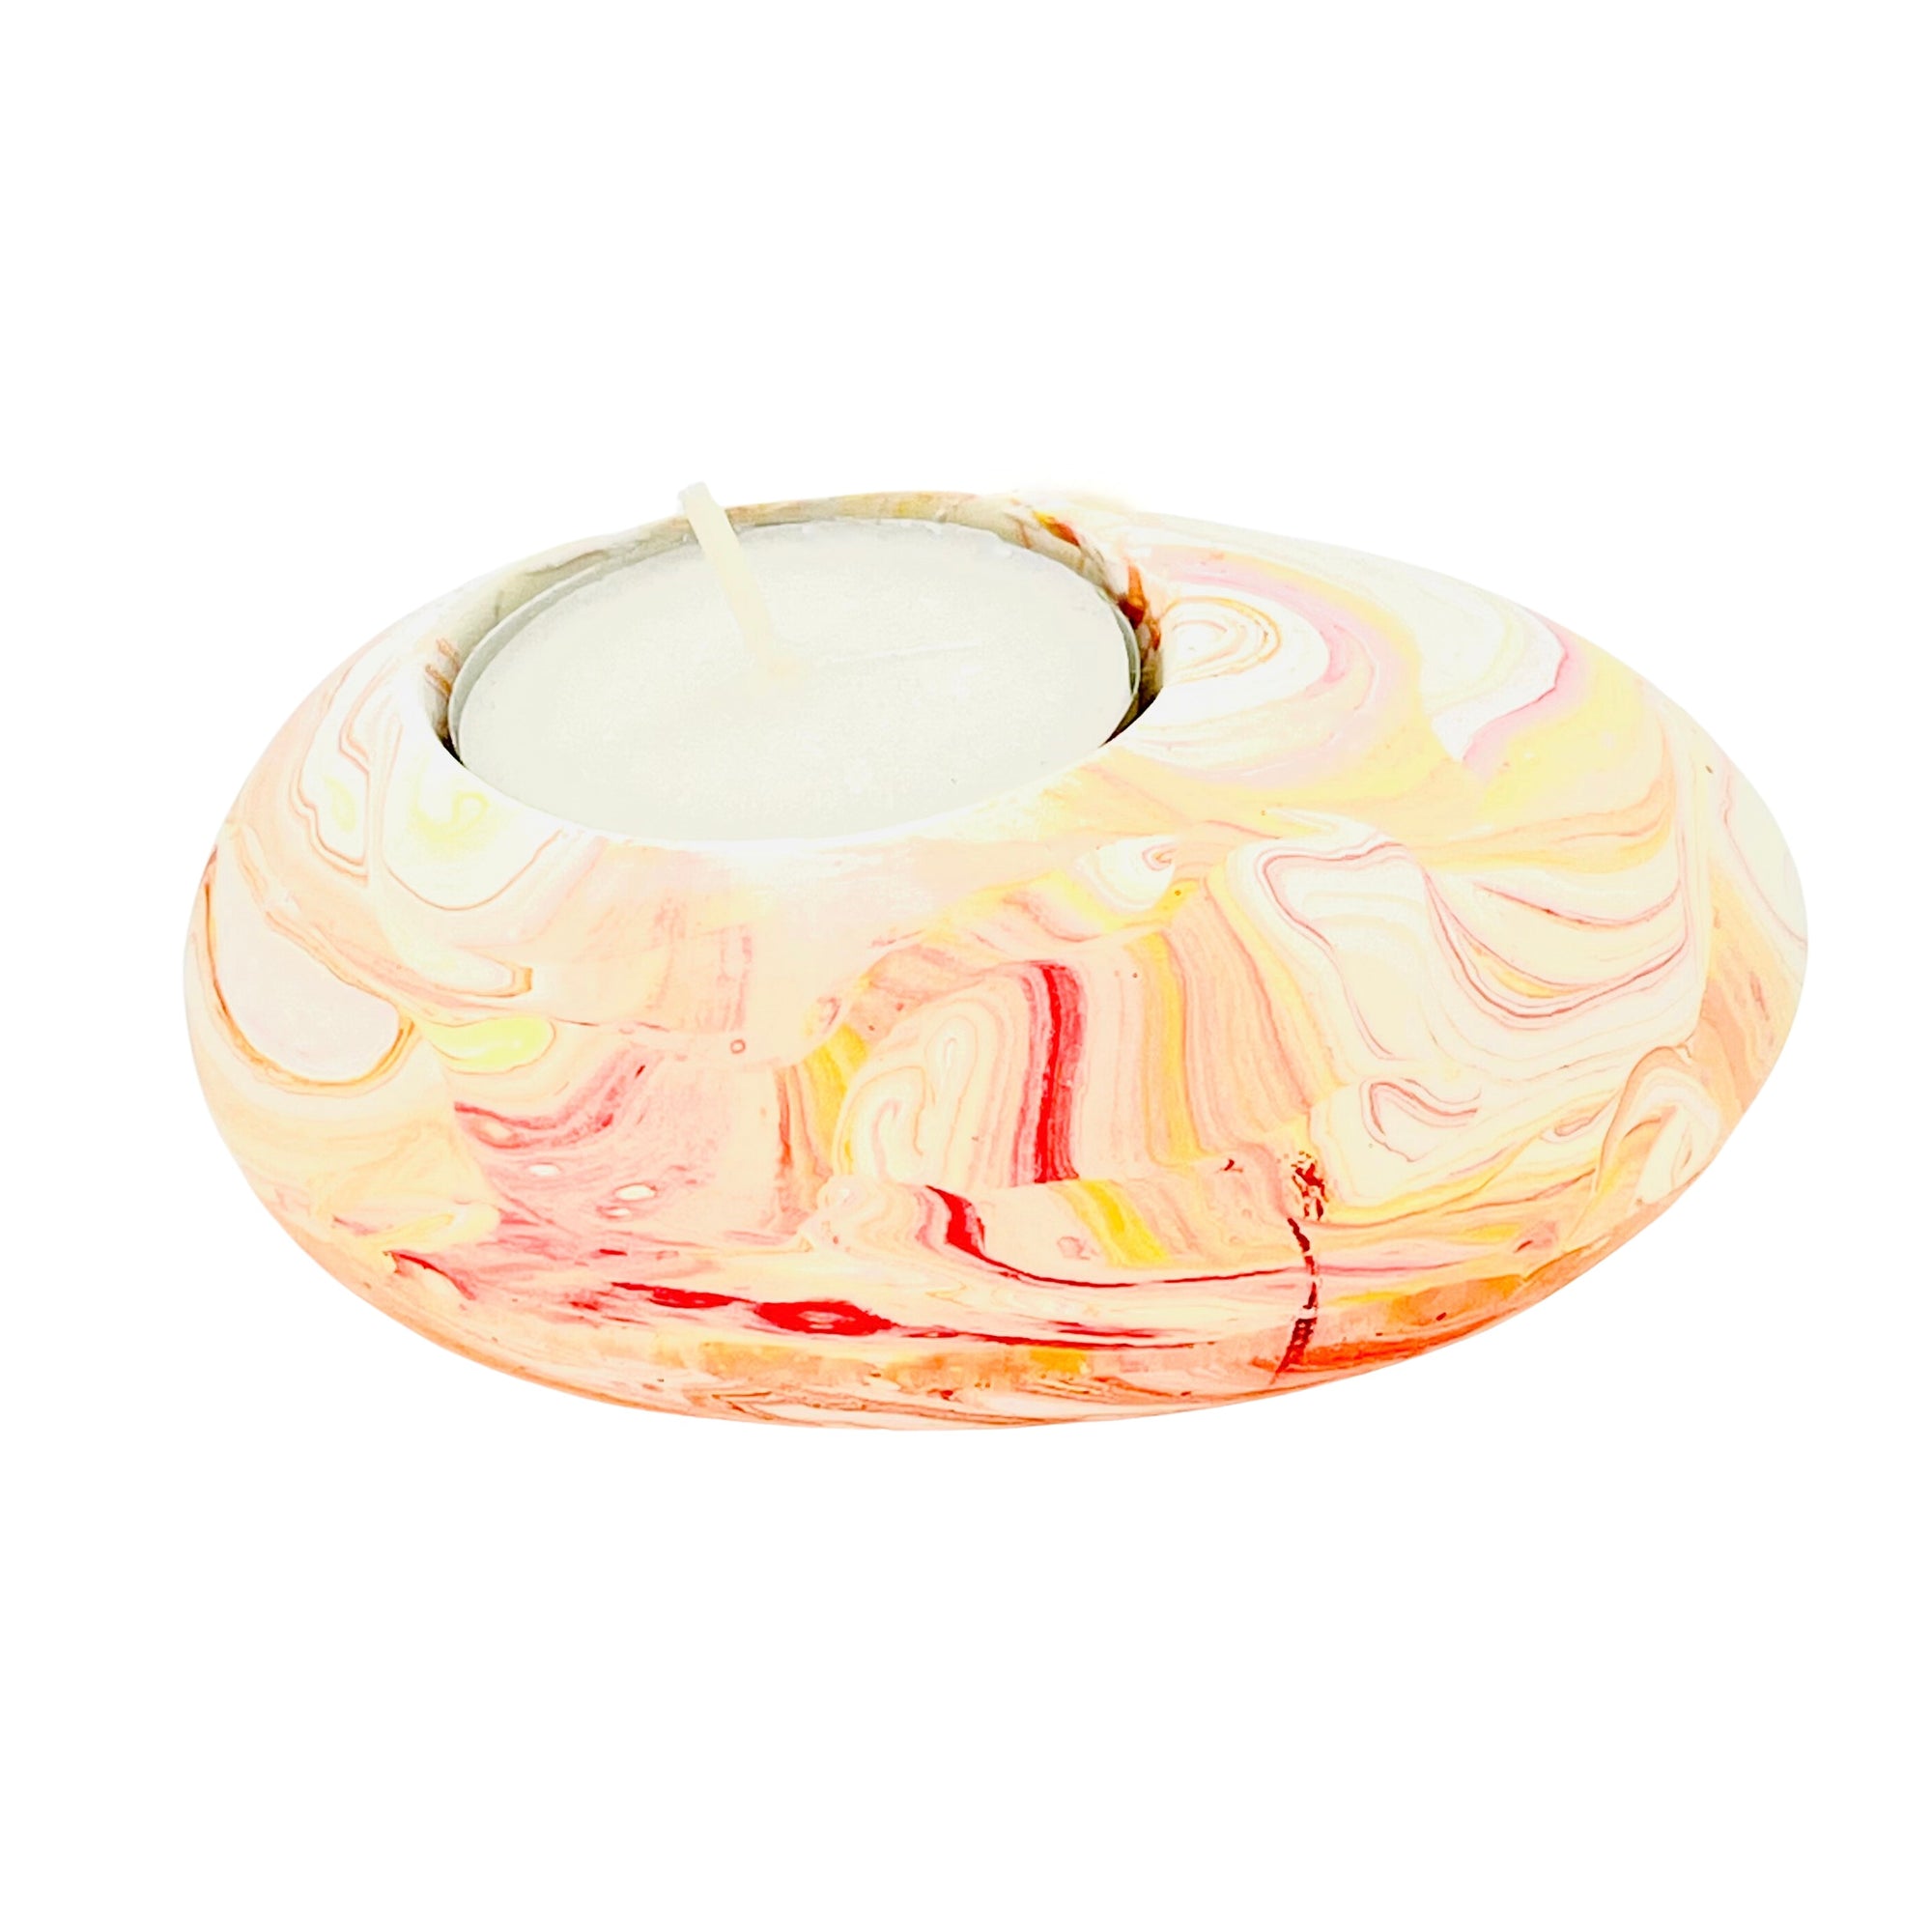 A Jesmonite tealight holder shaped like a pebble measuring 9cm in length and marbled with orange pigment.